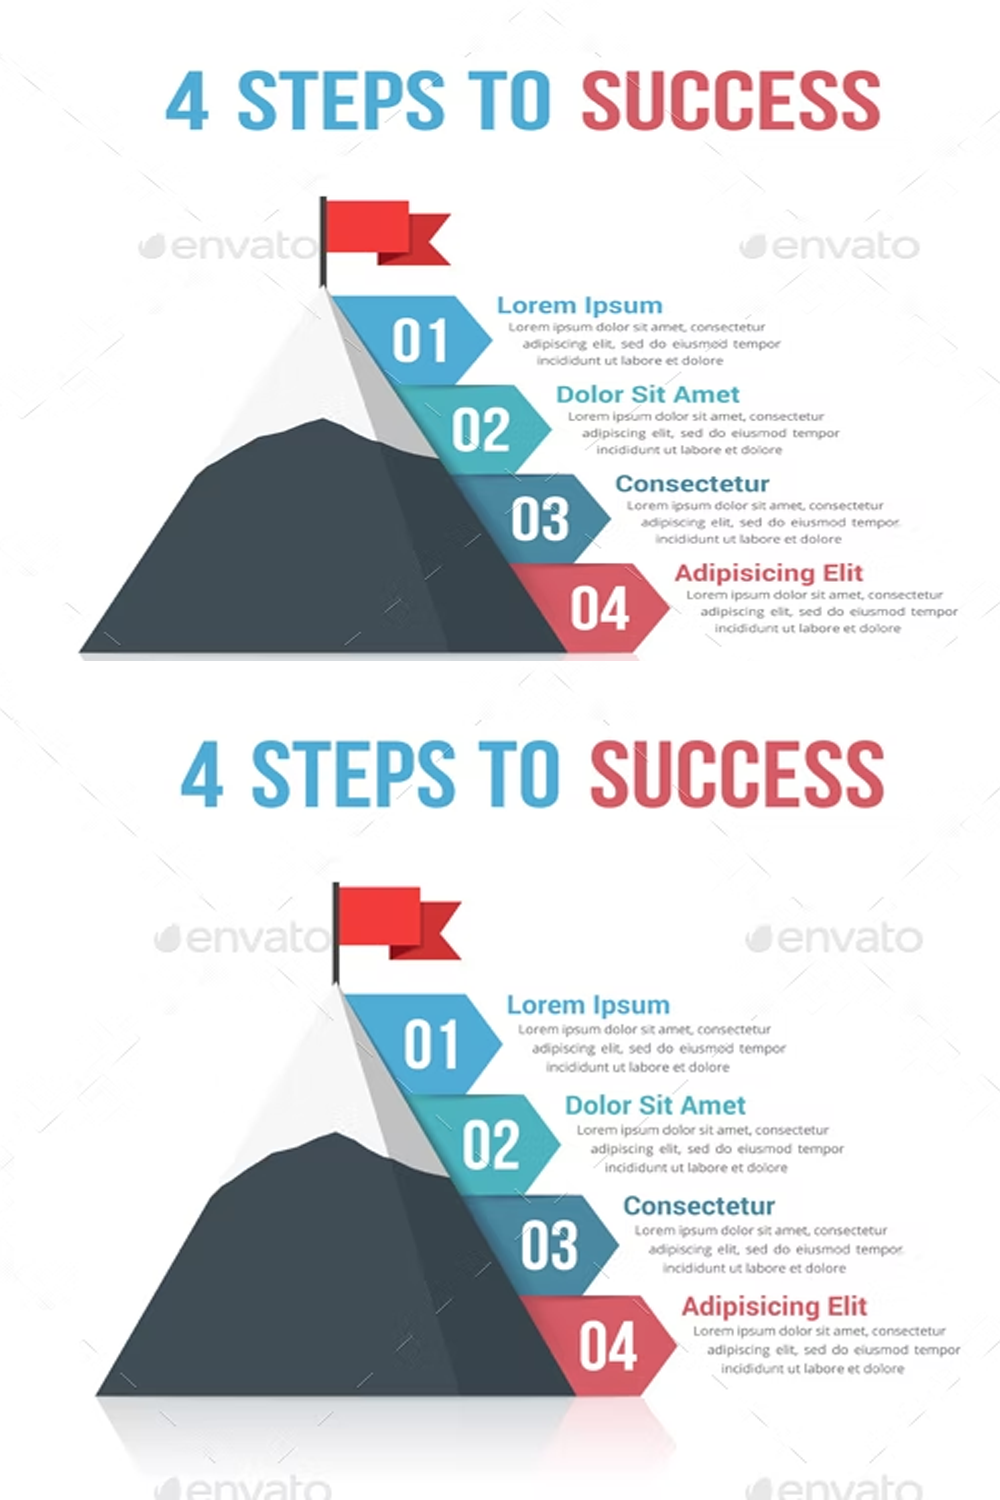 Illustrations 4 steps to success of pinterest.